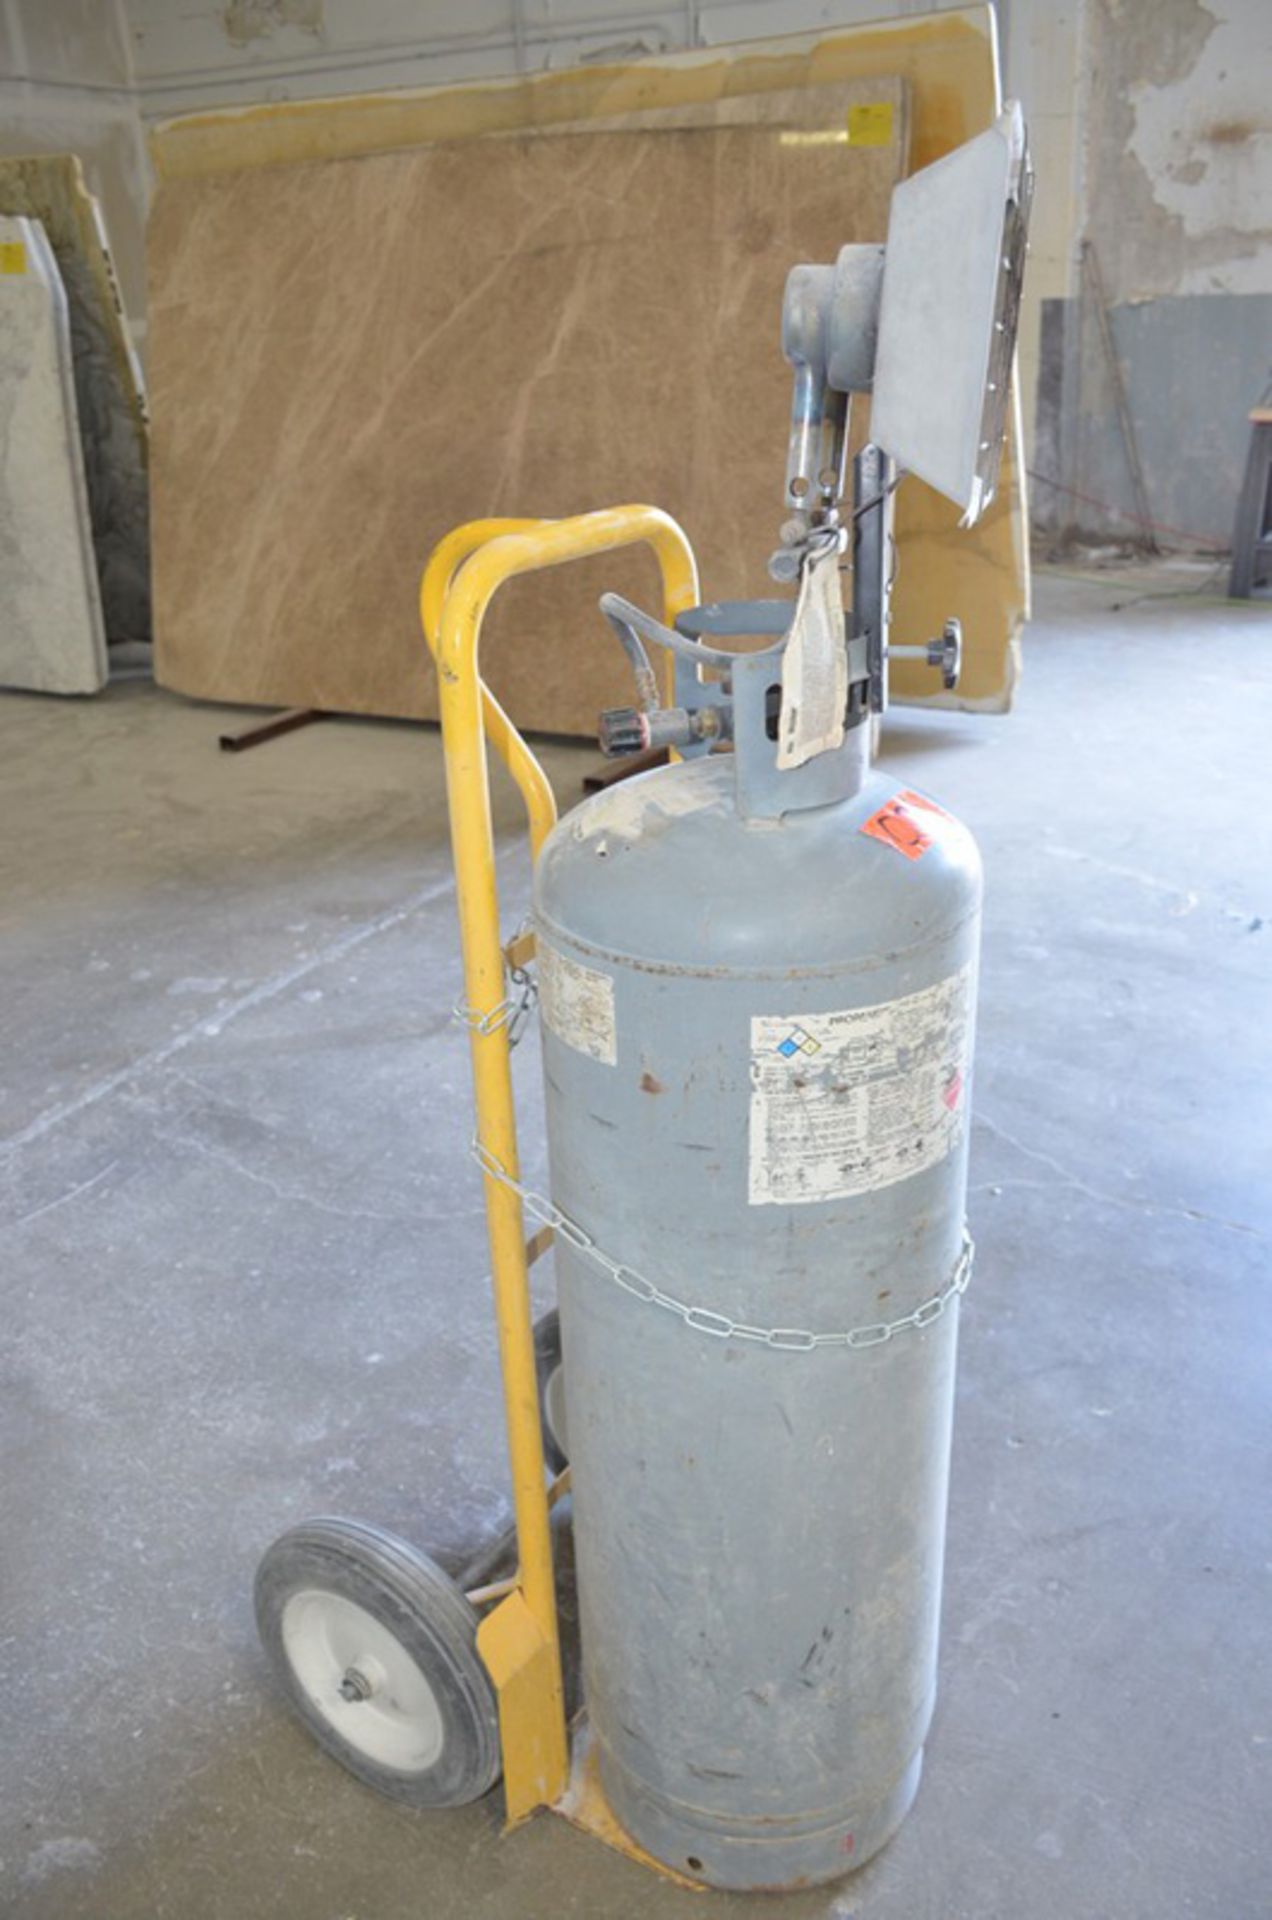 Gas Heater & Hand Cart - Image 3 of 5